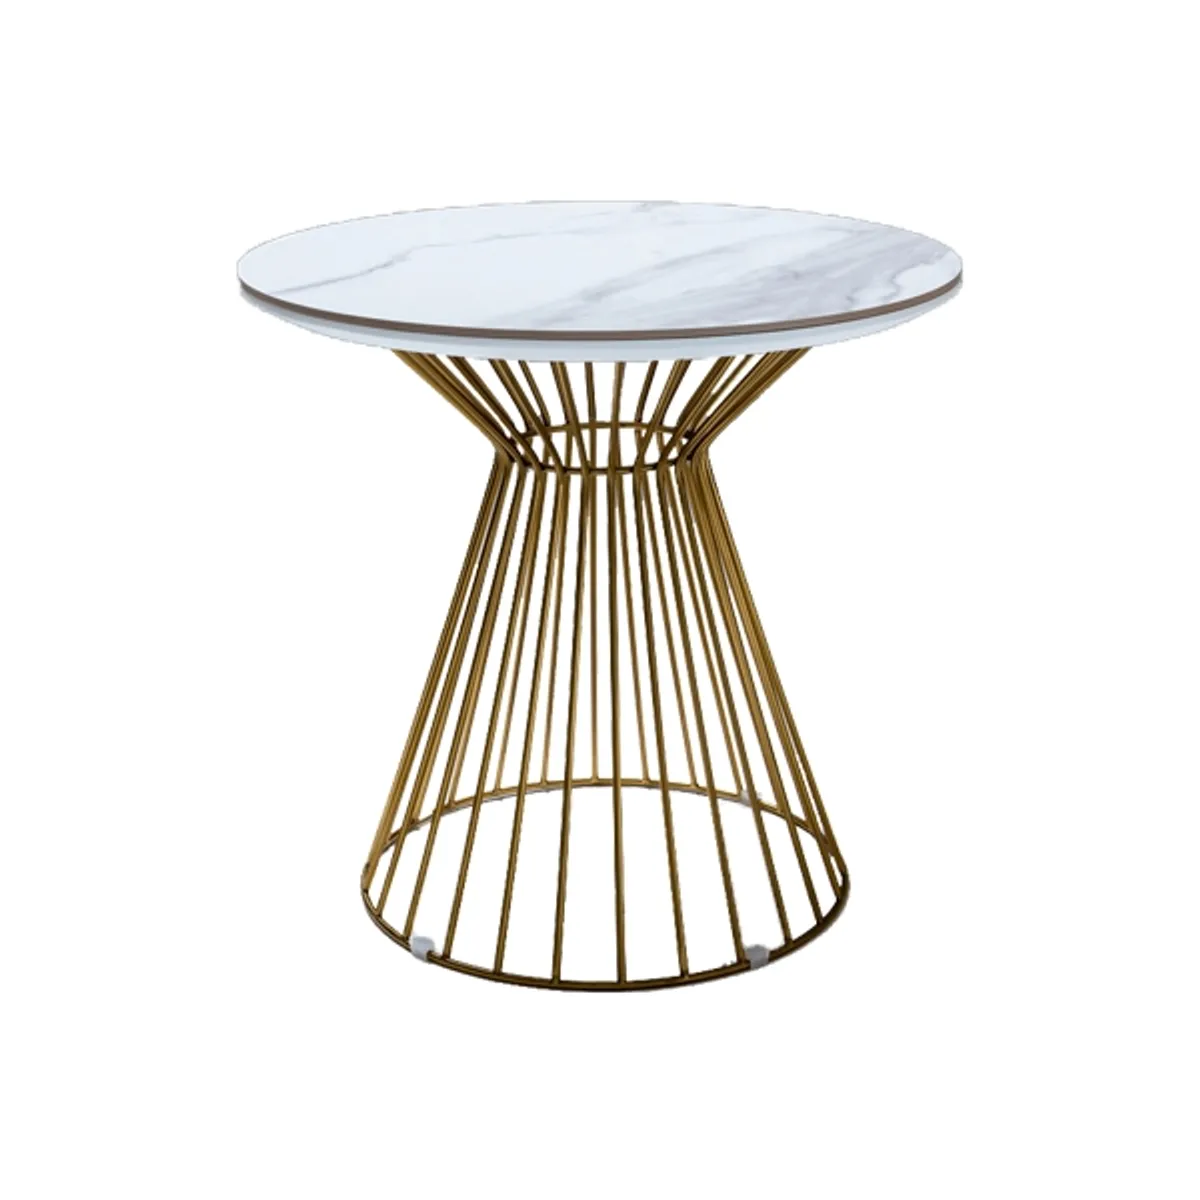 Slender side table Inside Out Contrats